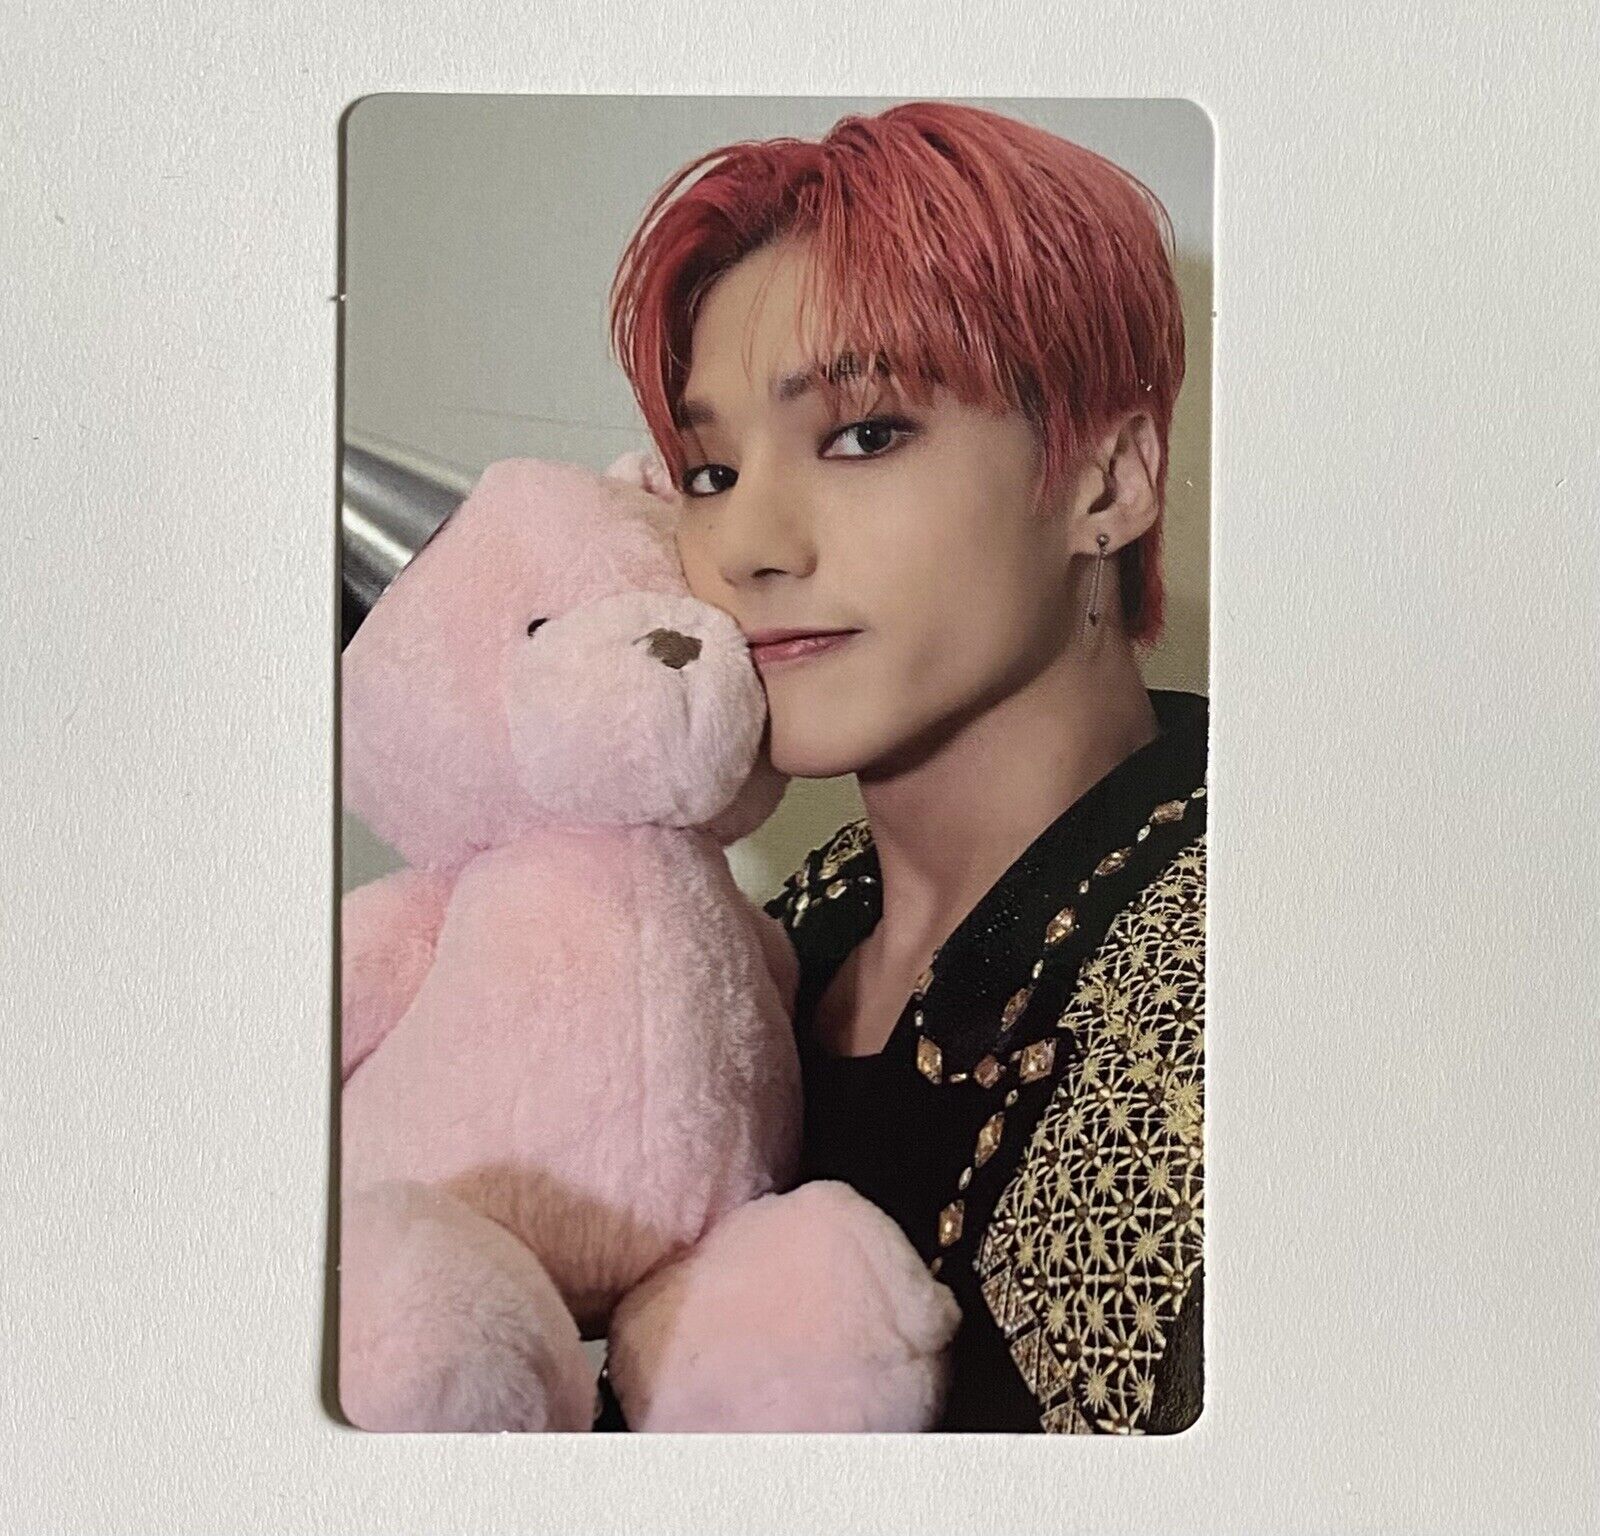 ATEEZ ATZ Spin Off: From the Witness Wooyoung Hug Target Exclusive *official*